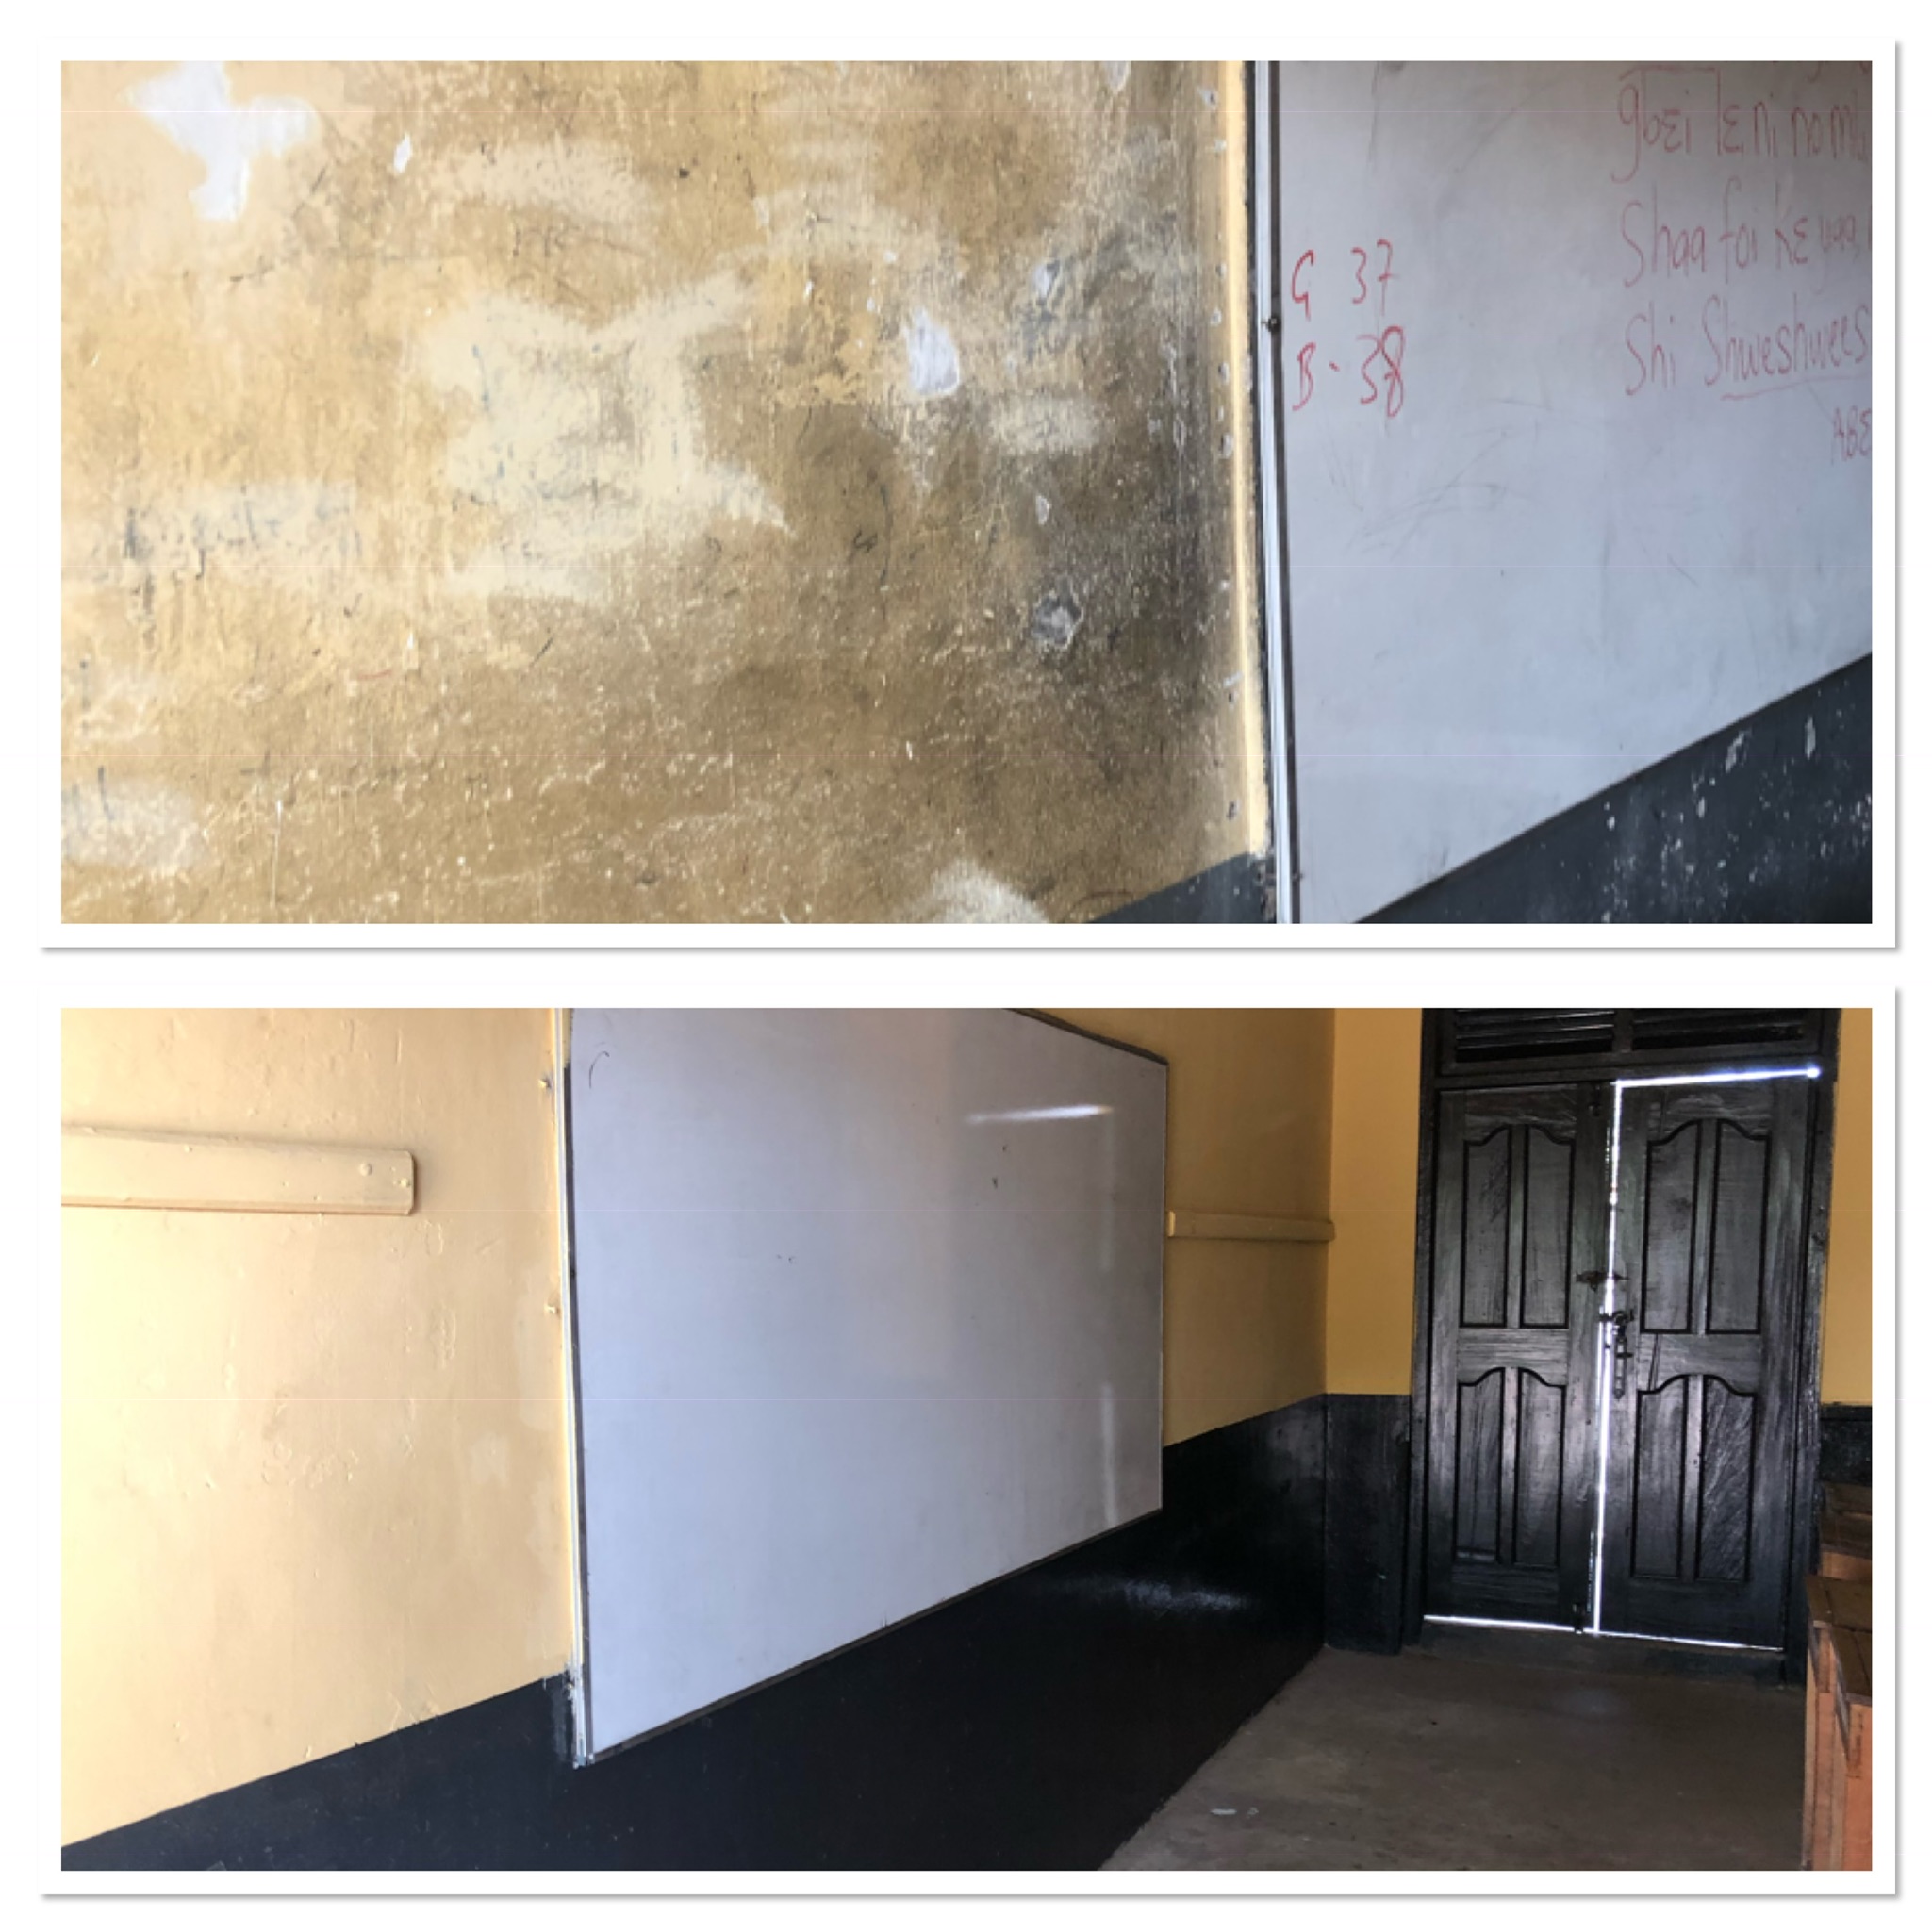  Before and after comparison of a classroom wall.  